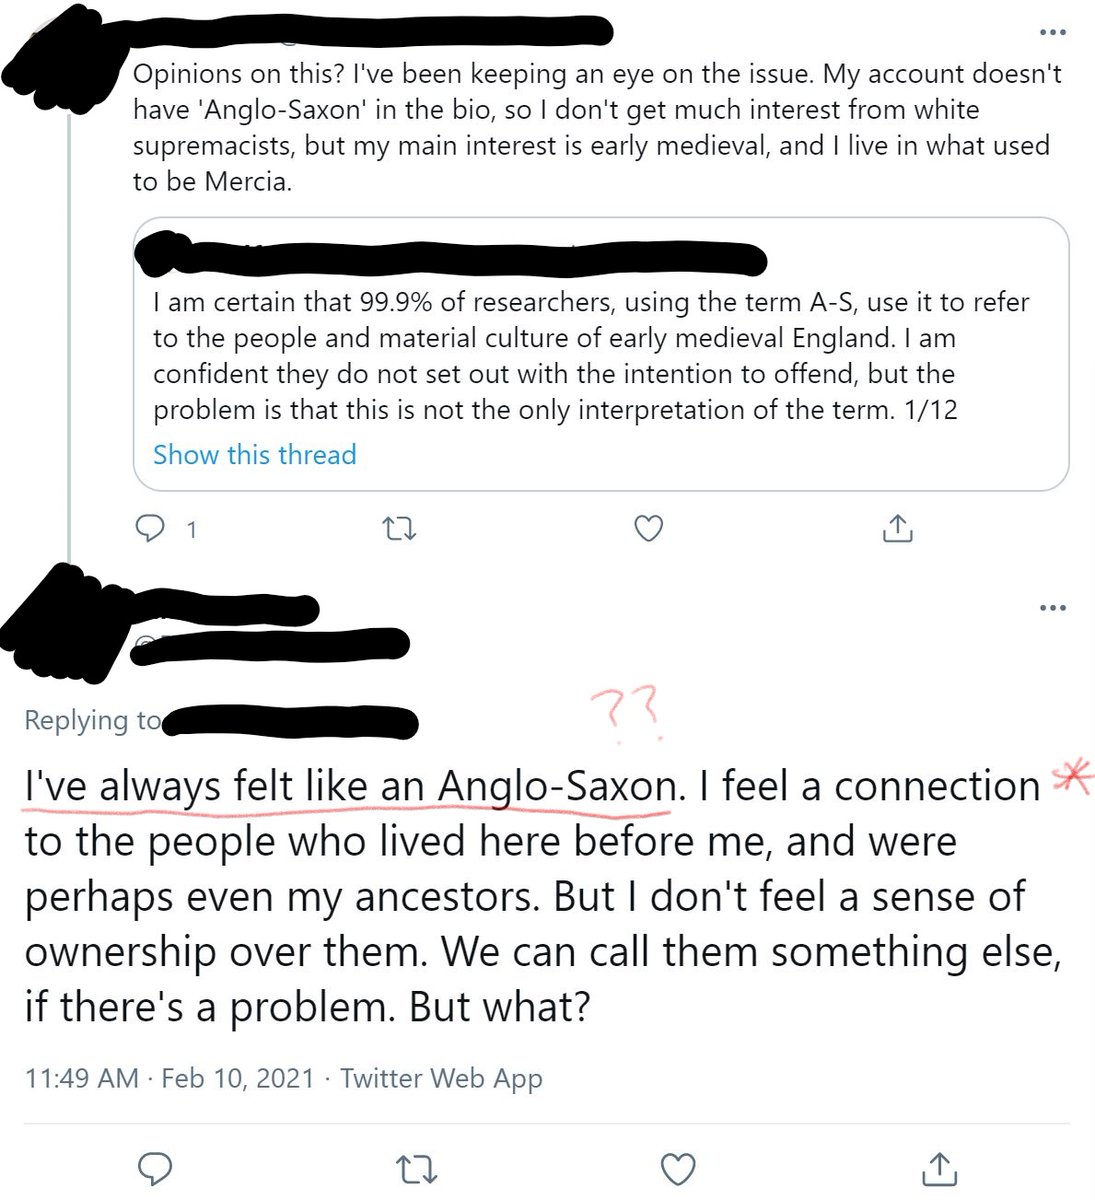 British ppl claiming they are "Anglo-Saxon" without actually understanding what that means (what does that mean?). The misconception is that ONLY wyte supremacists are using this. You are wrong.  #medievaltwitter 3/